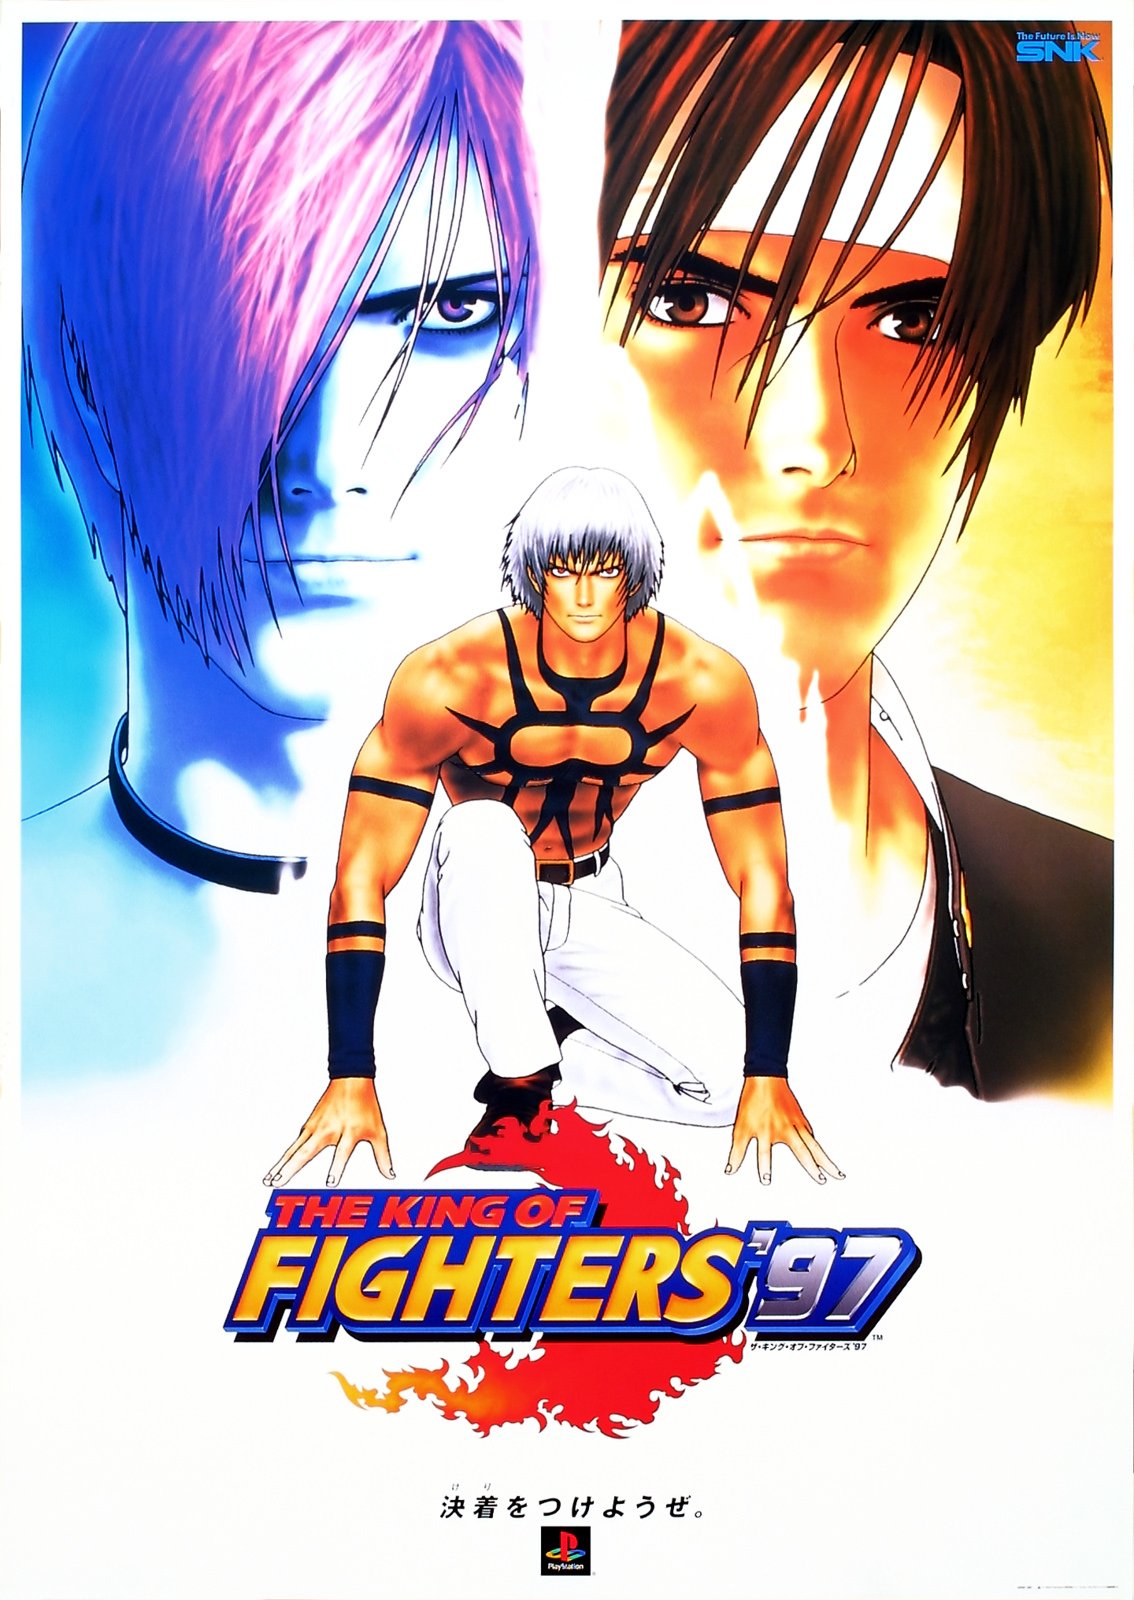 The King of Fighters Series Celebrates 25th Anniversary